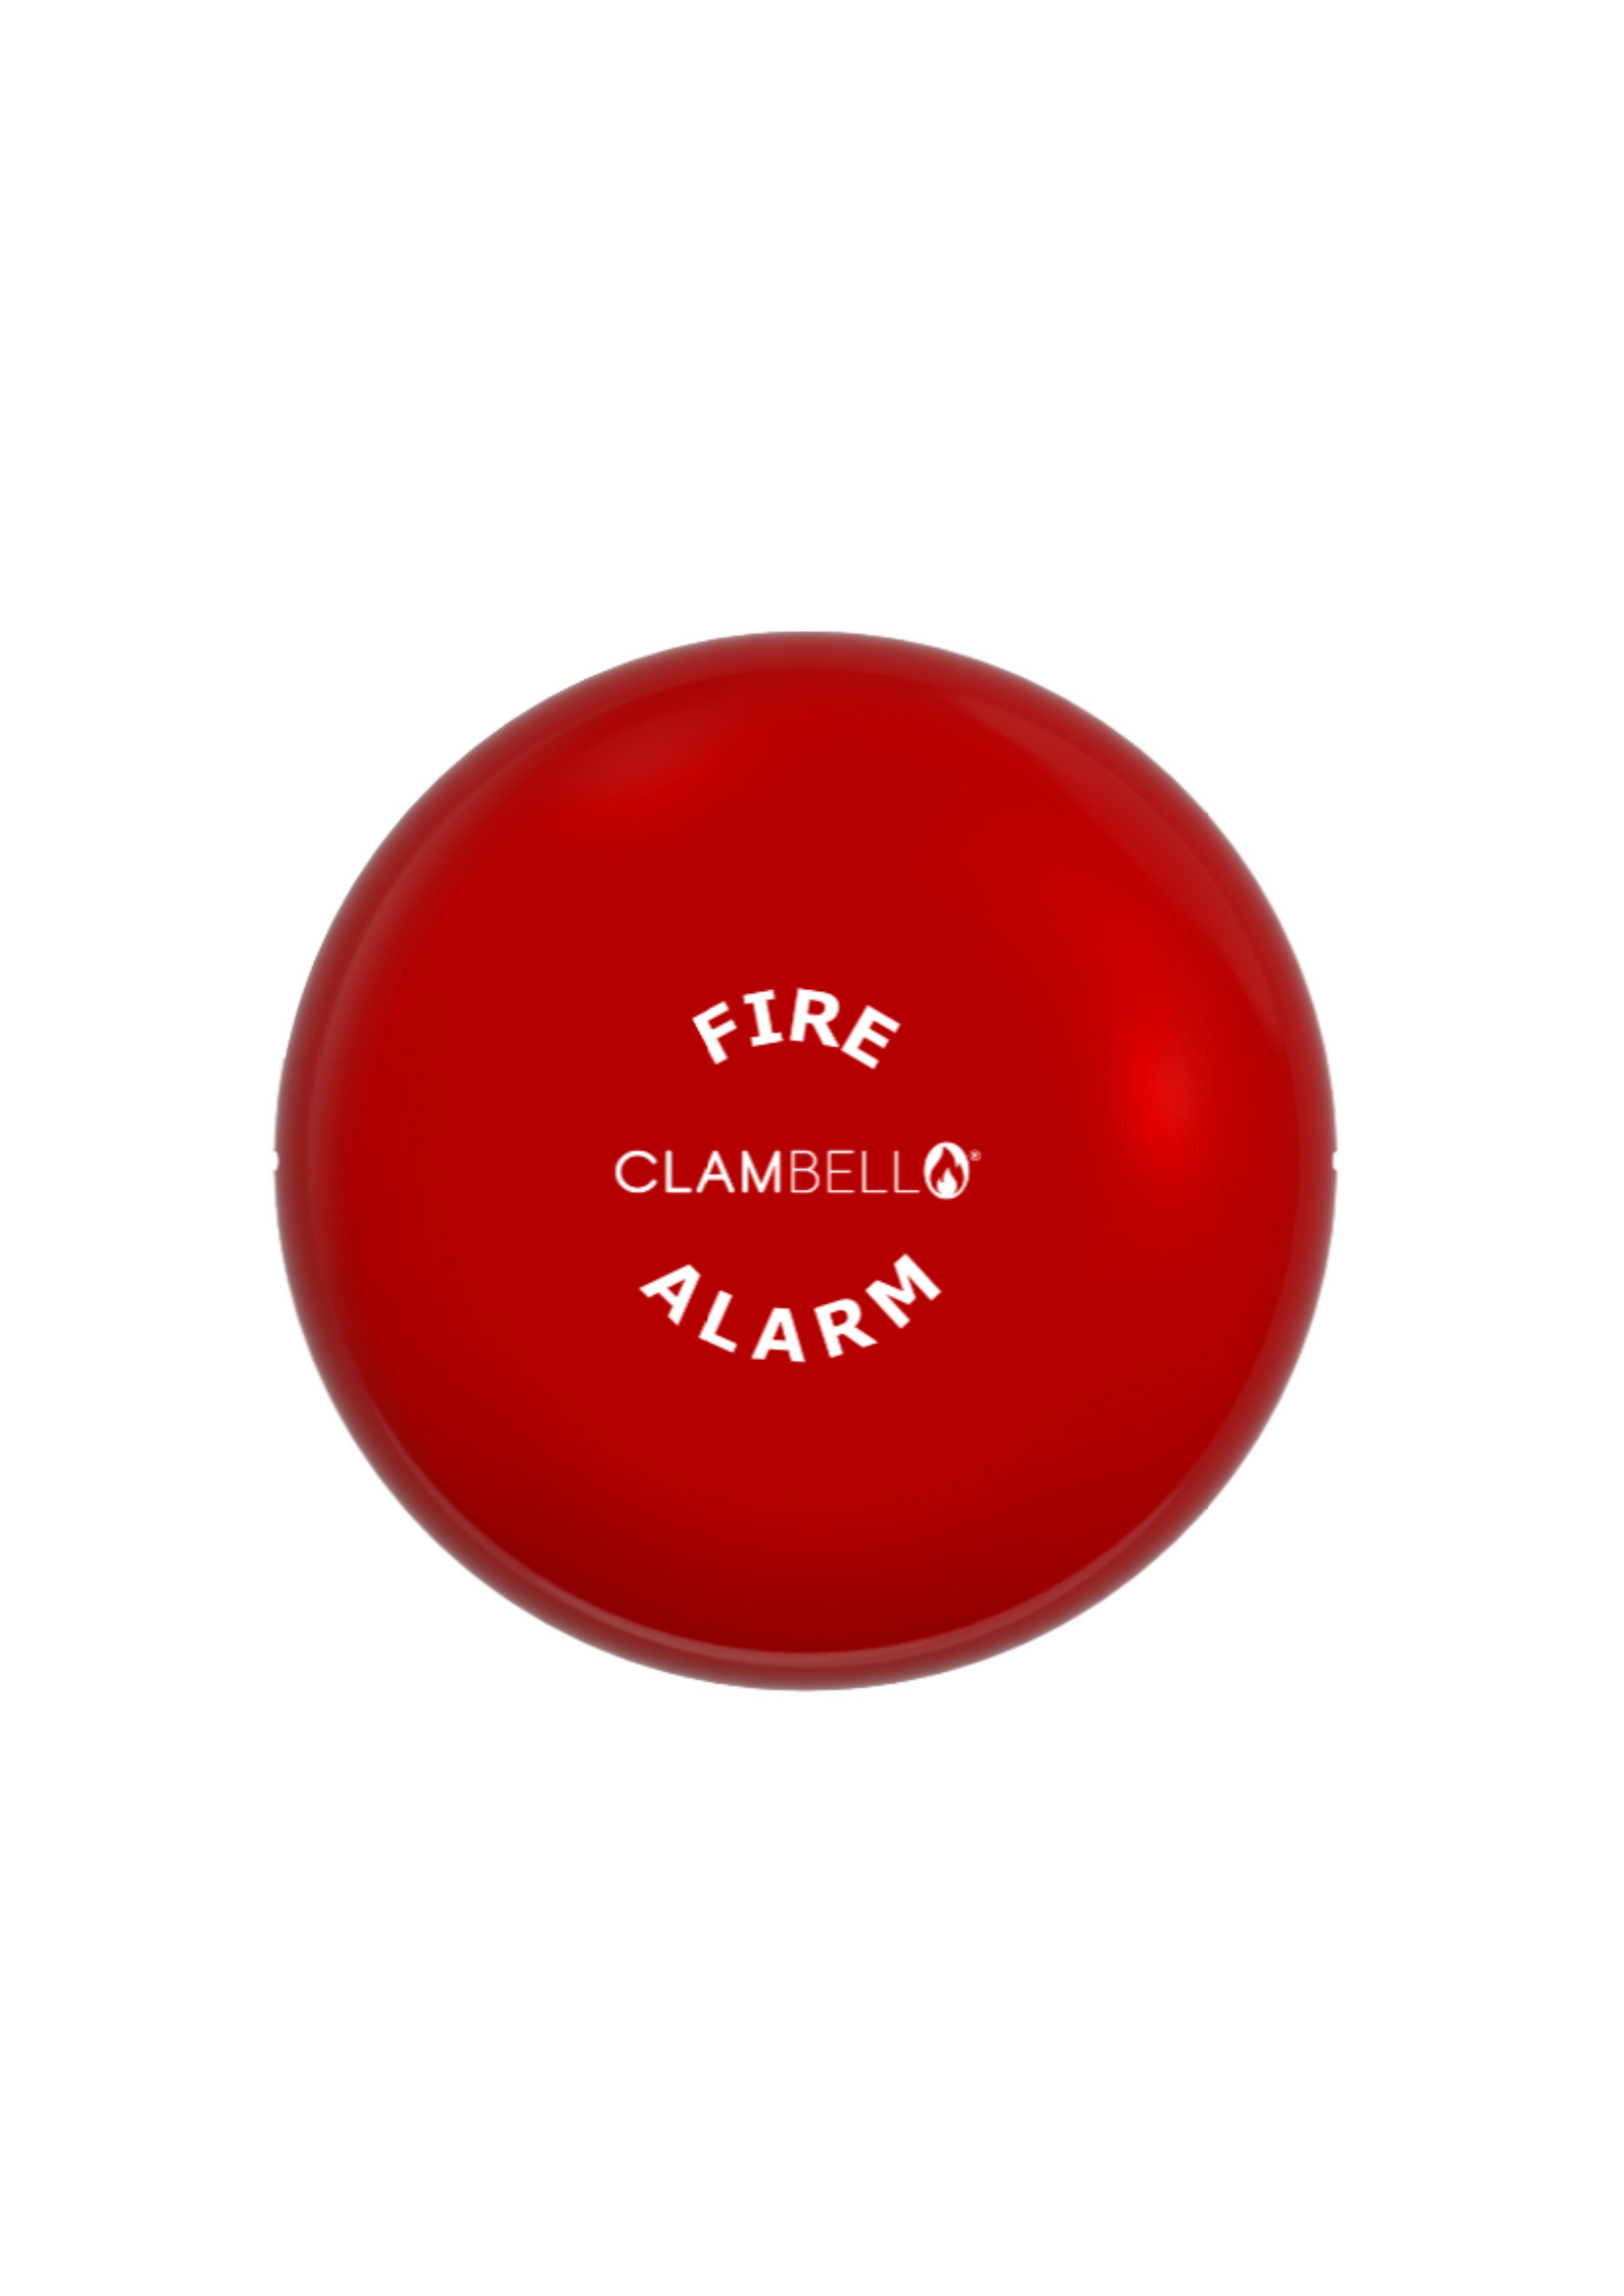 ClamBell 24V 6 Inch Fire Alarm Bell - Weatherproof...